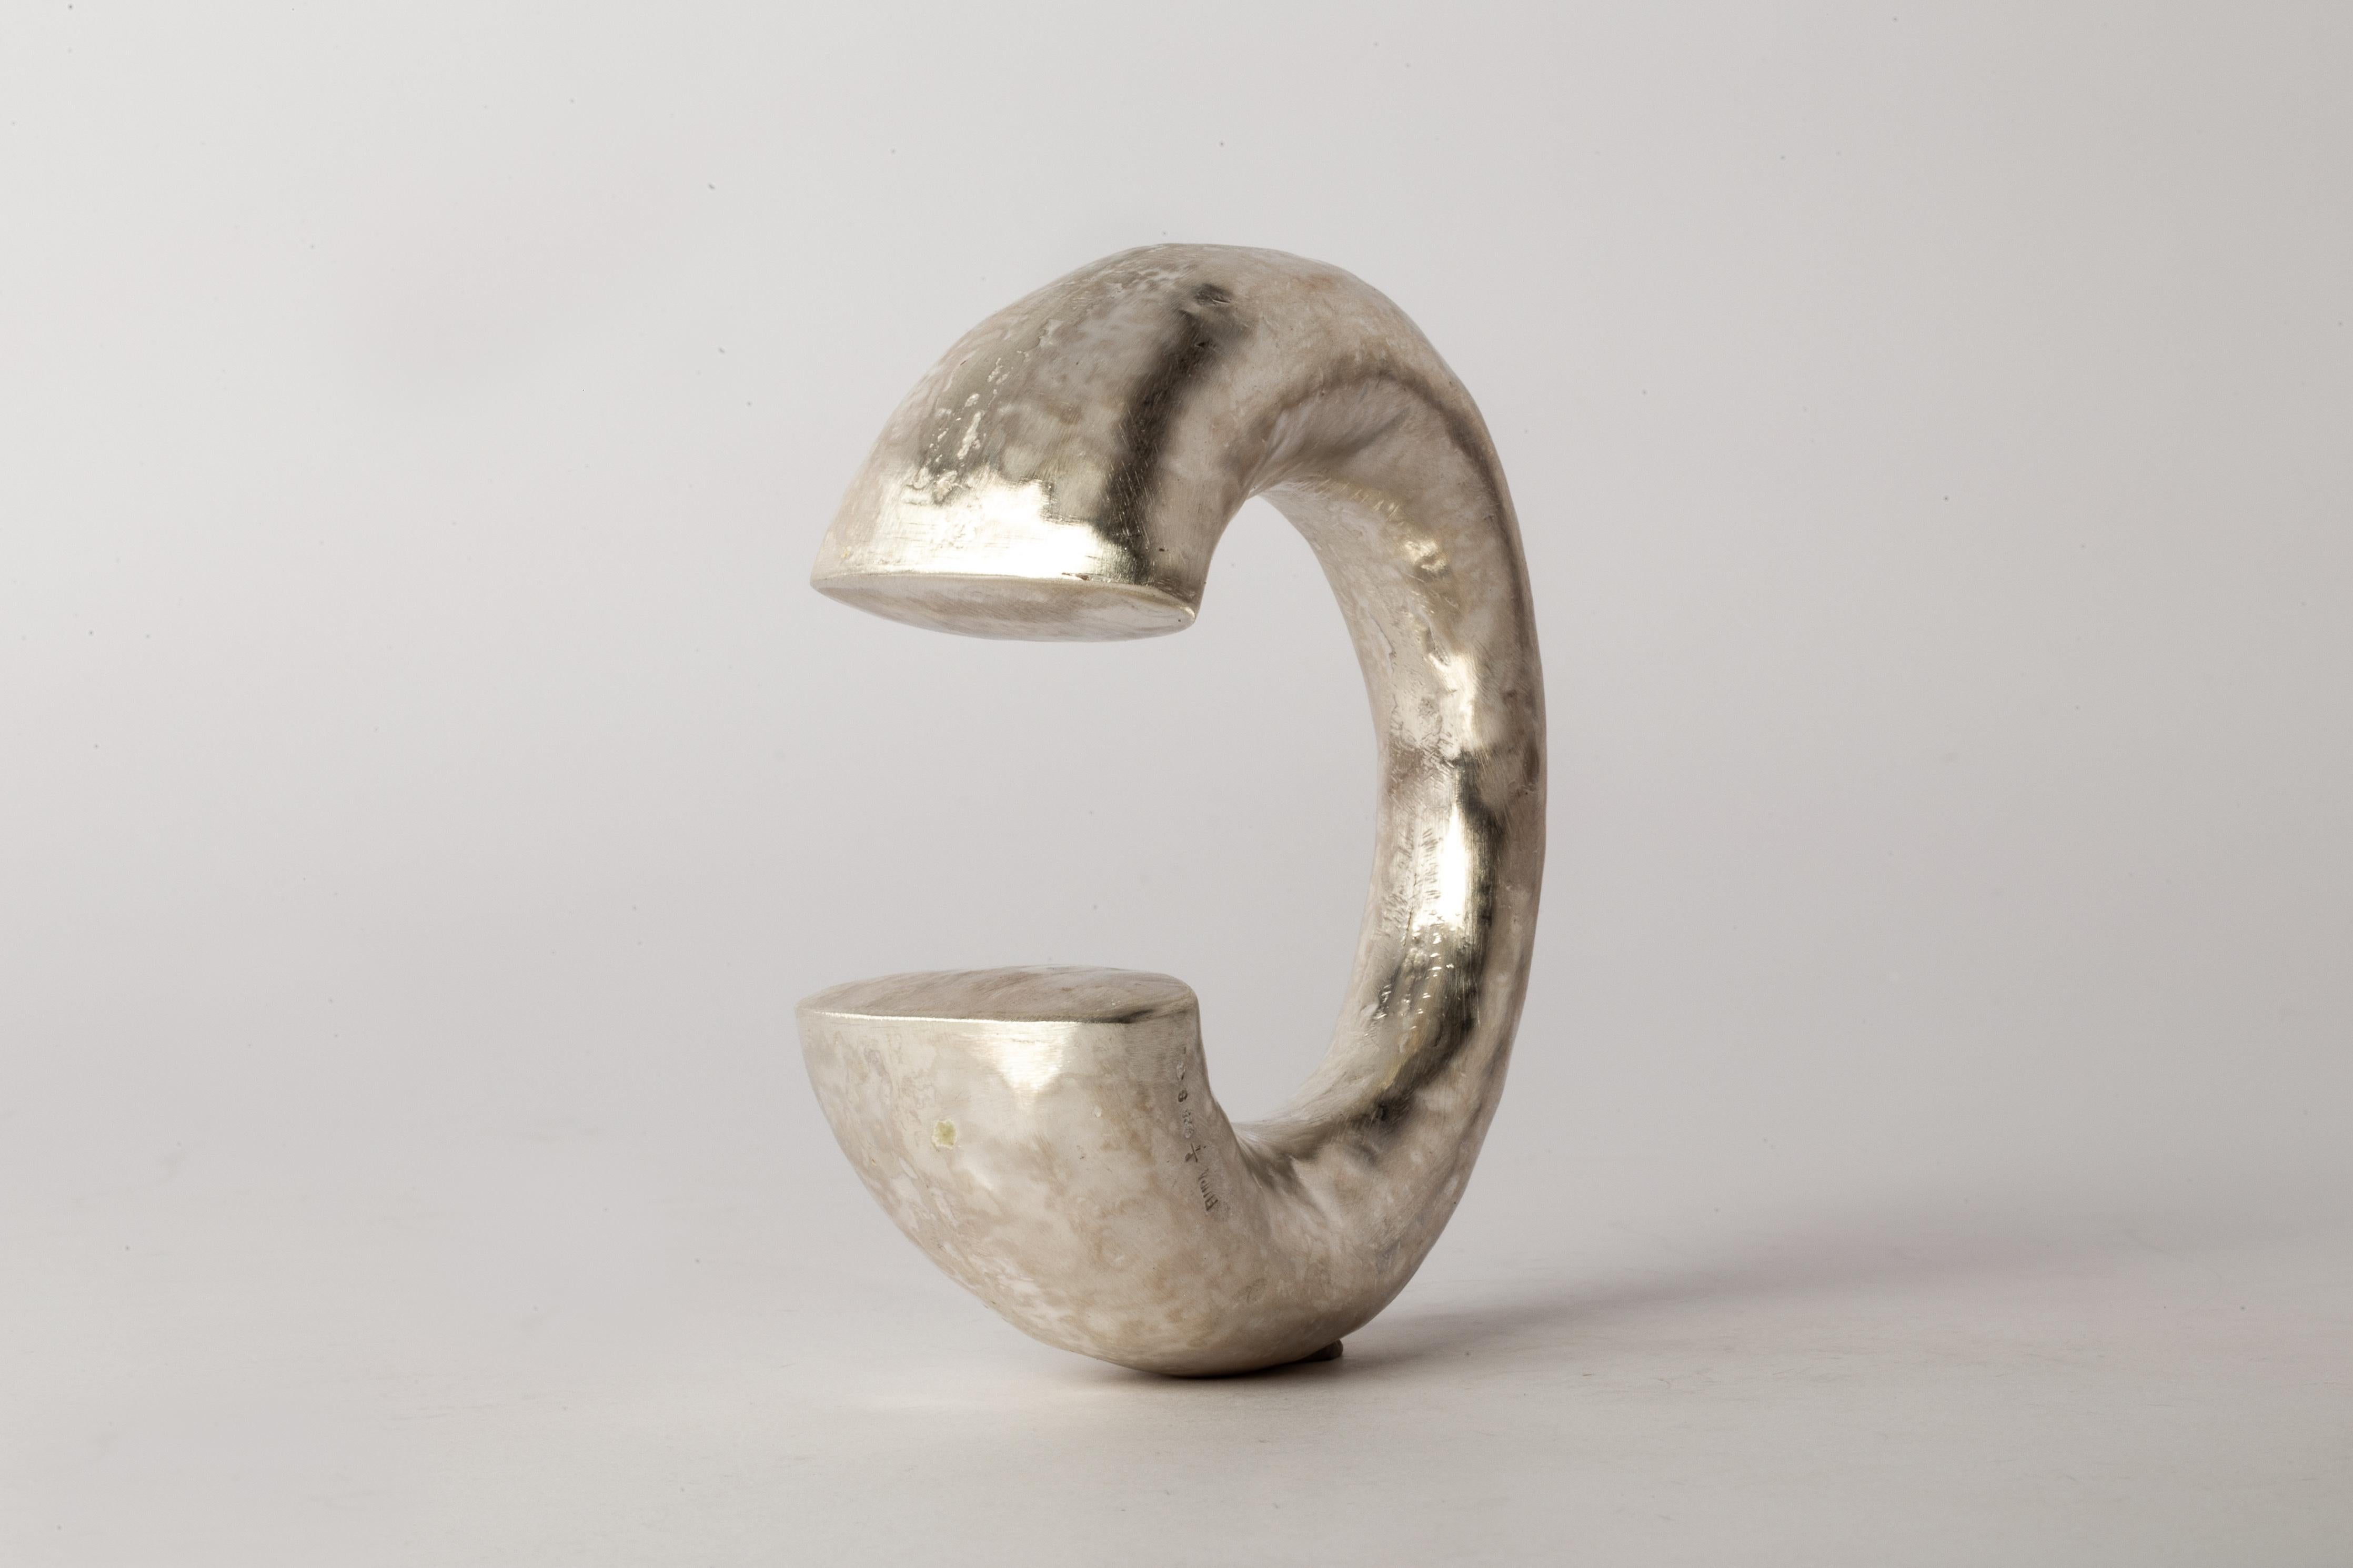 Bracelet in matte sterling silver. This piece is 100% hand fabricated from metal plate; cut into sections and soldered together to make the hollow three dimensional form. If sterling silver, the sheet metal is made by hand. The silver is melted and